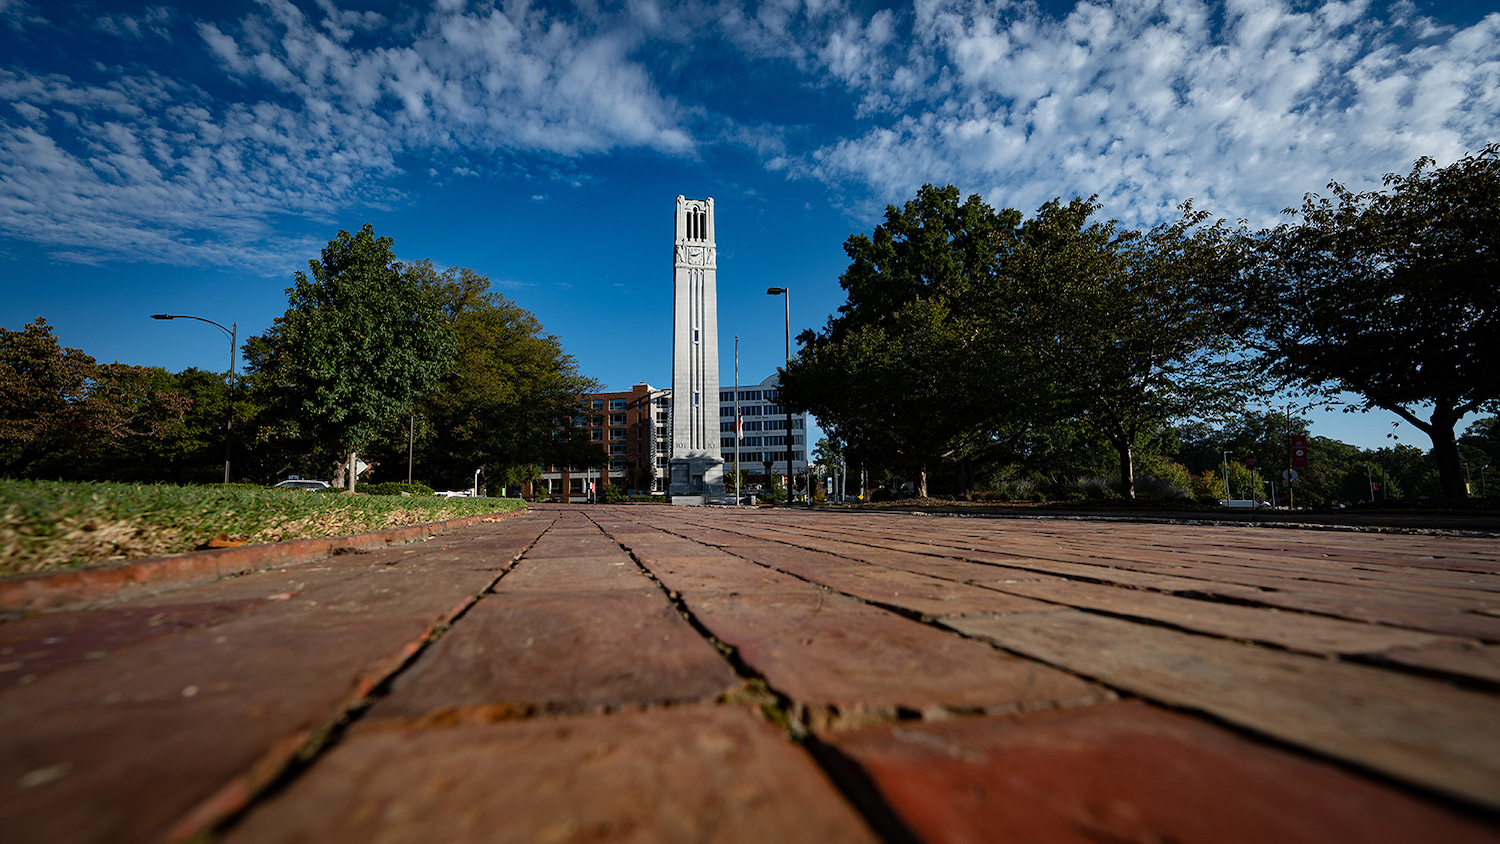 The NC State Belltower on main campus. Photo by Marc Hall.